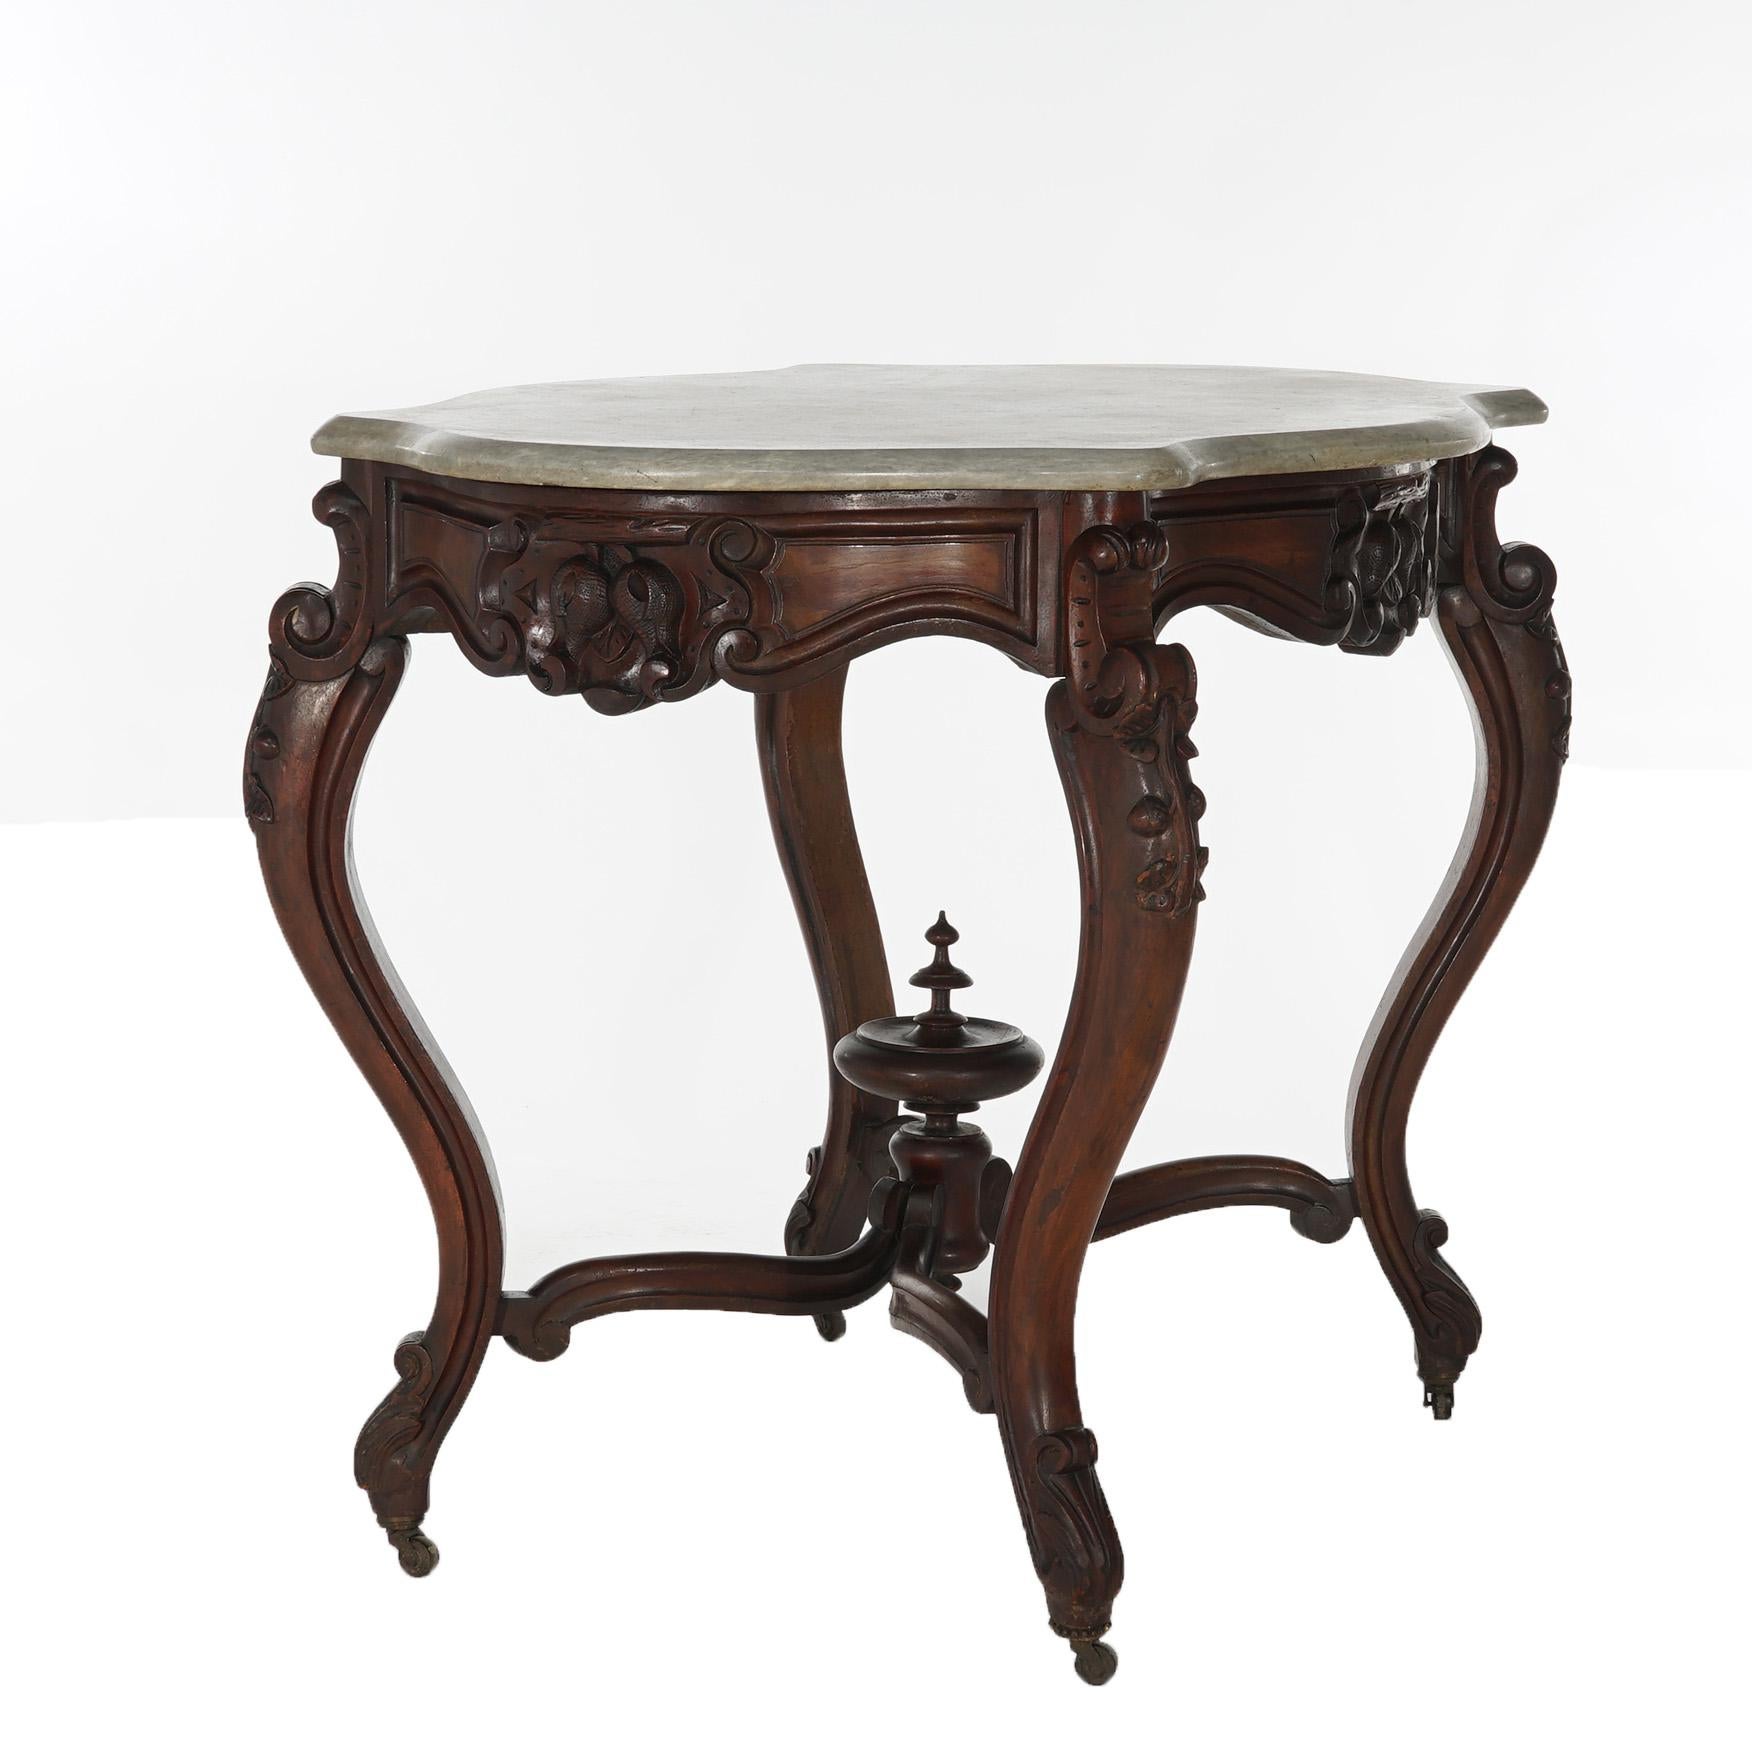 Antique Victorian Rococo Carved Walnut & Marble Top Parlor Table C1800 For Sale 5